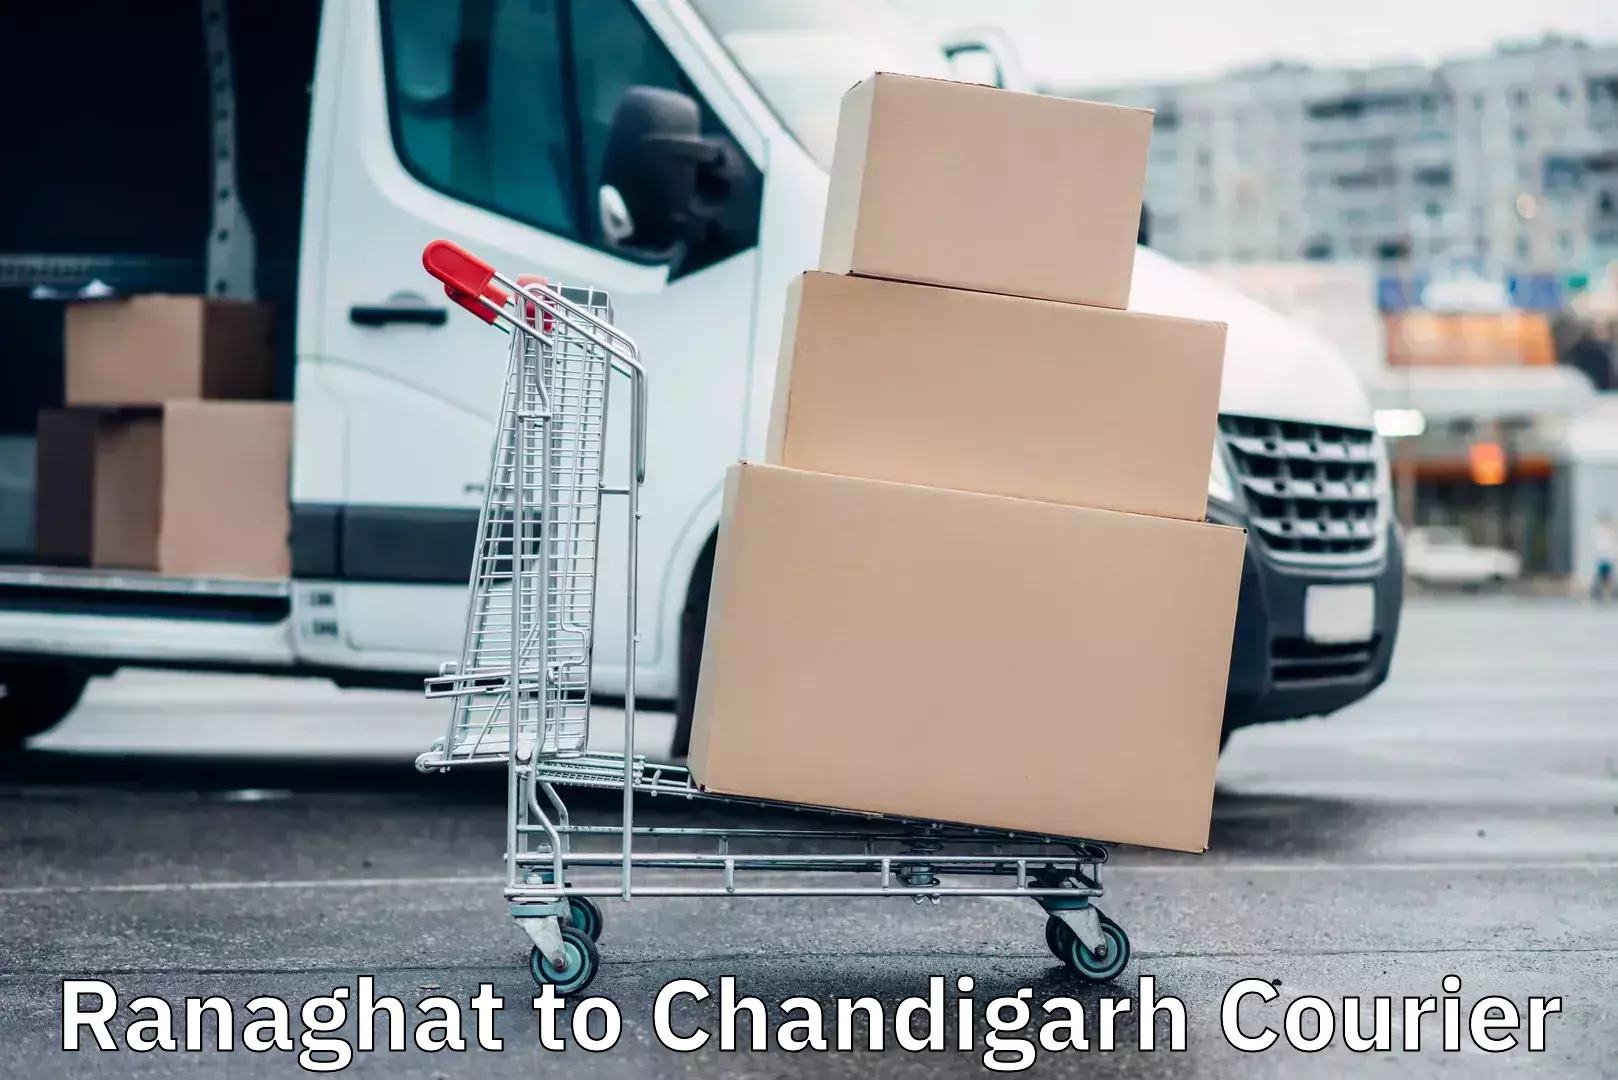 Courier service innovation Ranaghat to Chandigarh